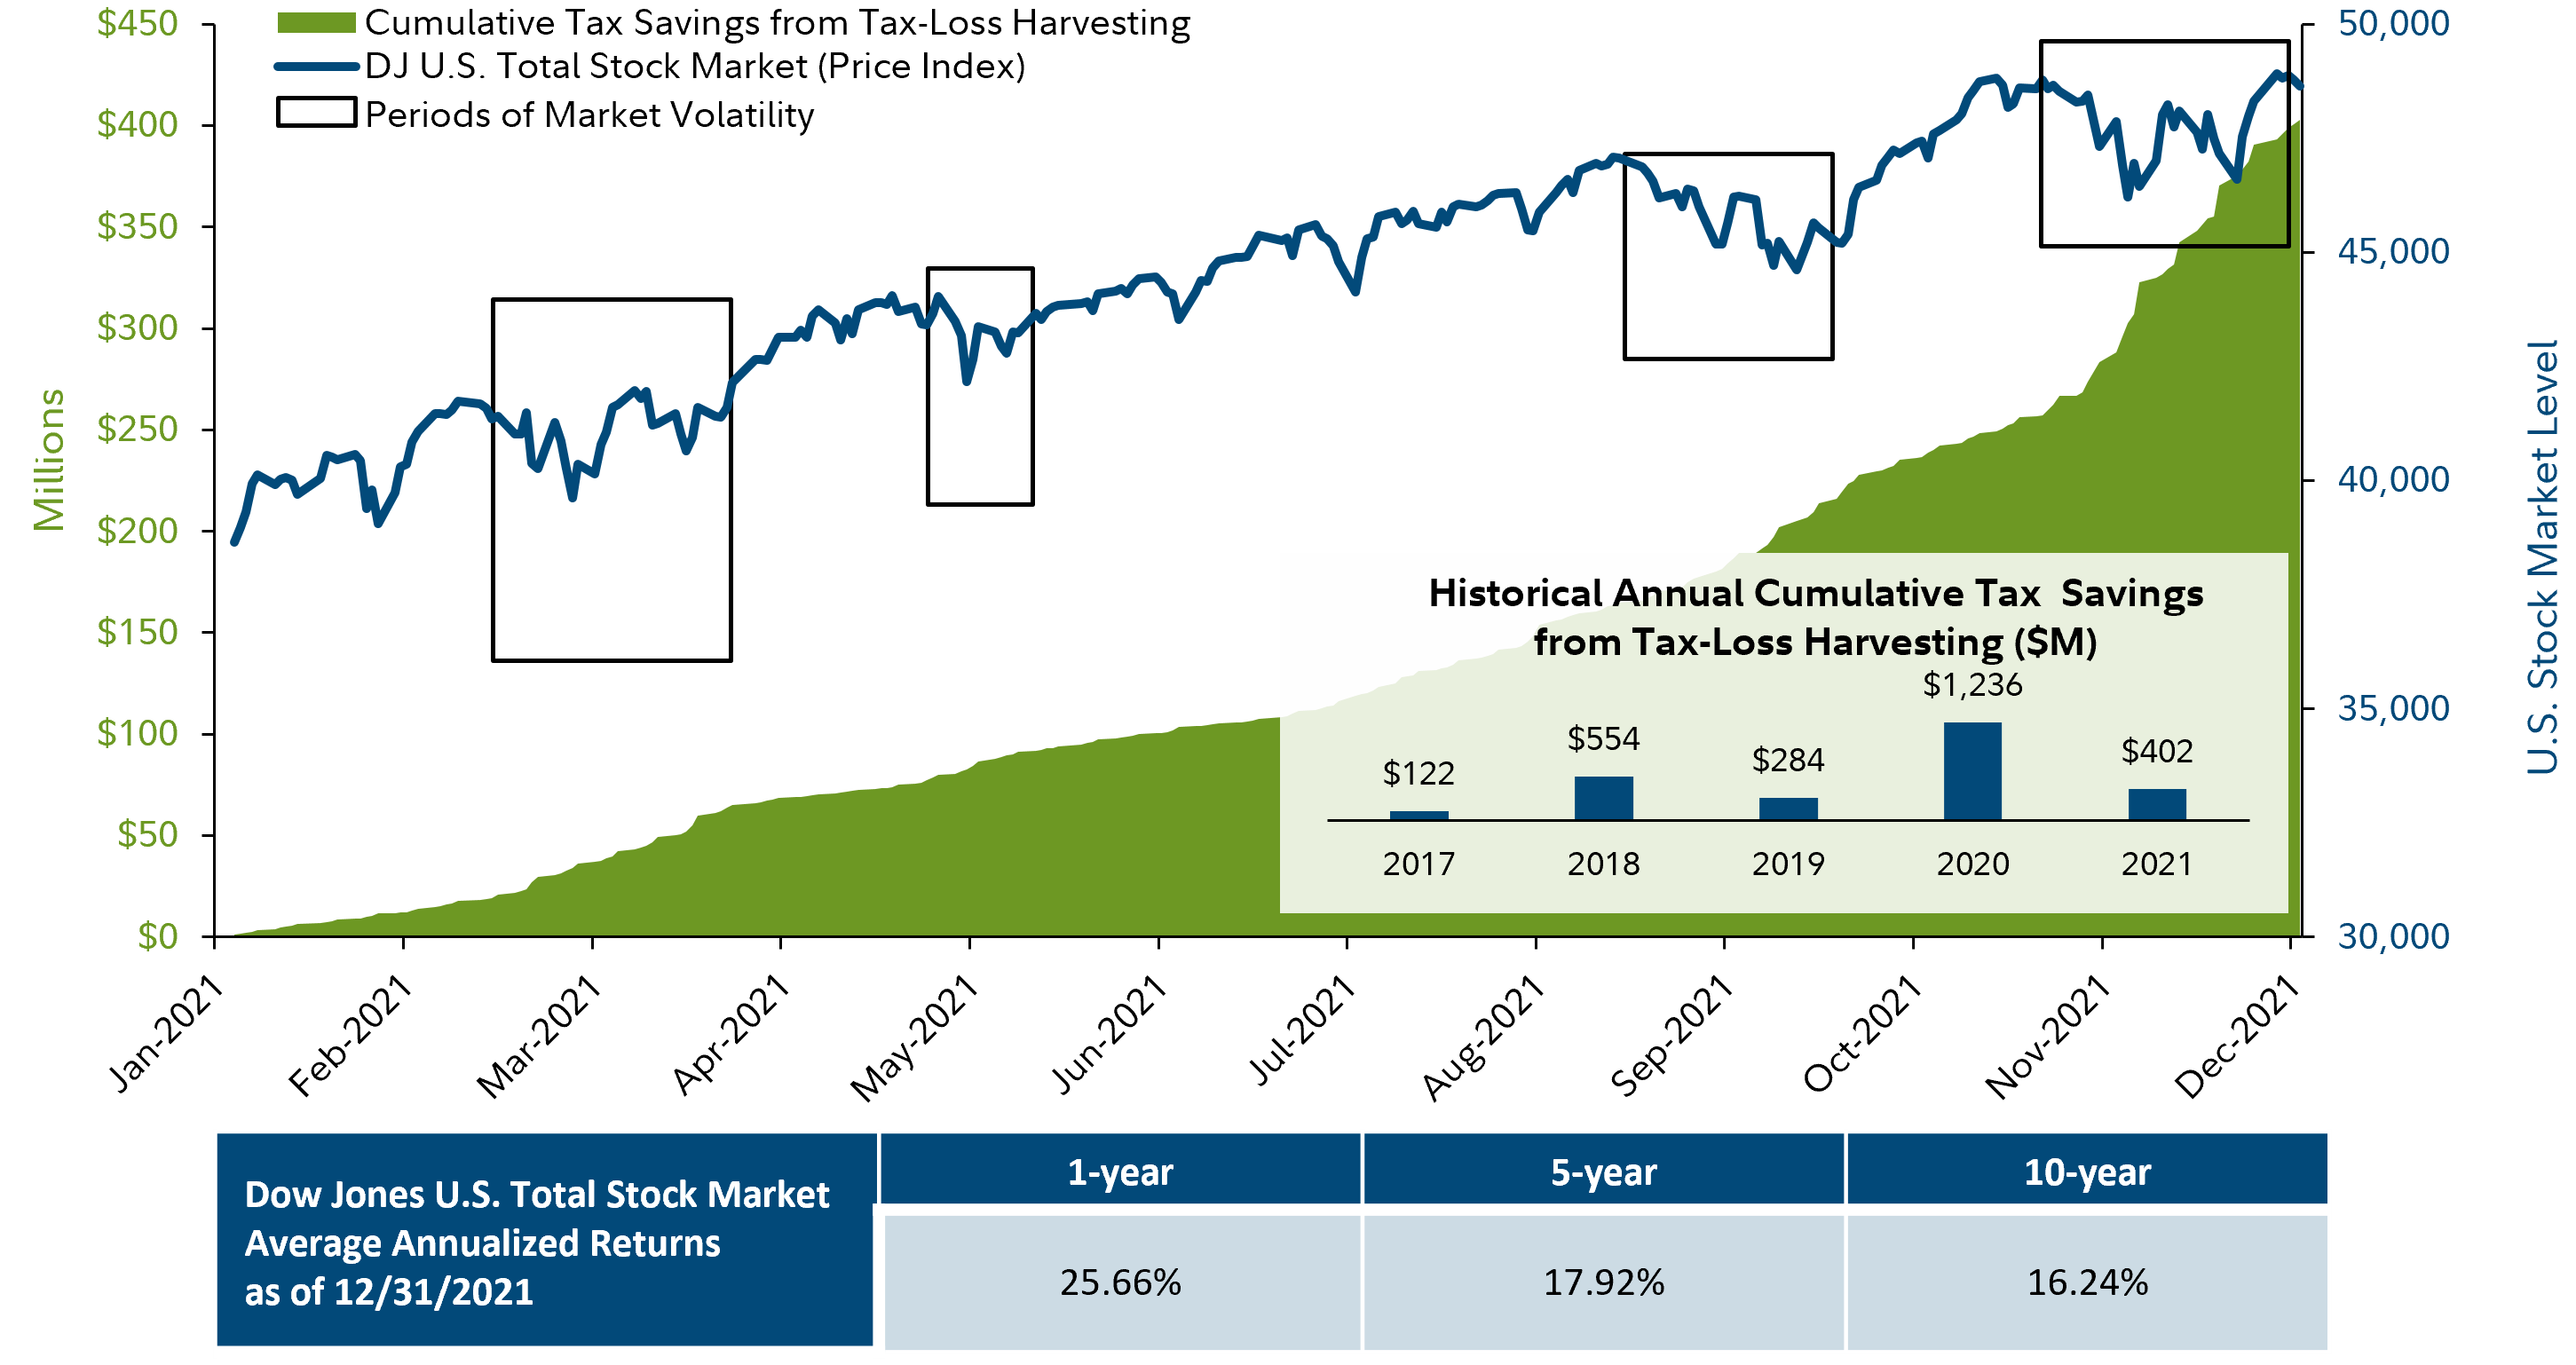 Chart: This graphic is intended to show how market volatility has the potential to create tax savings through tax-loss harvesting. Performance of Dow Jones US Total Market Index between January 2021 and December 2021 is shown to illustrate periods of market volatility, which are indicated by boxes. Cumulative tax savings created by tax-loss harvesting is shown to indicate how savings can often follow these periods of market volatility.